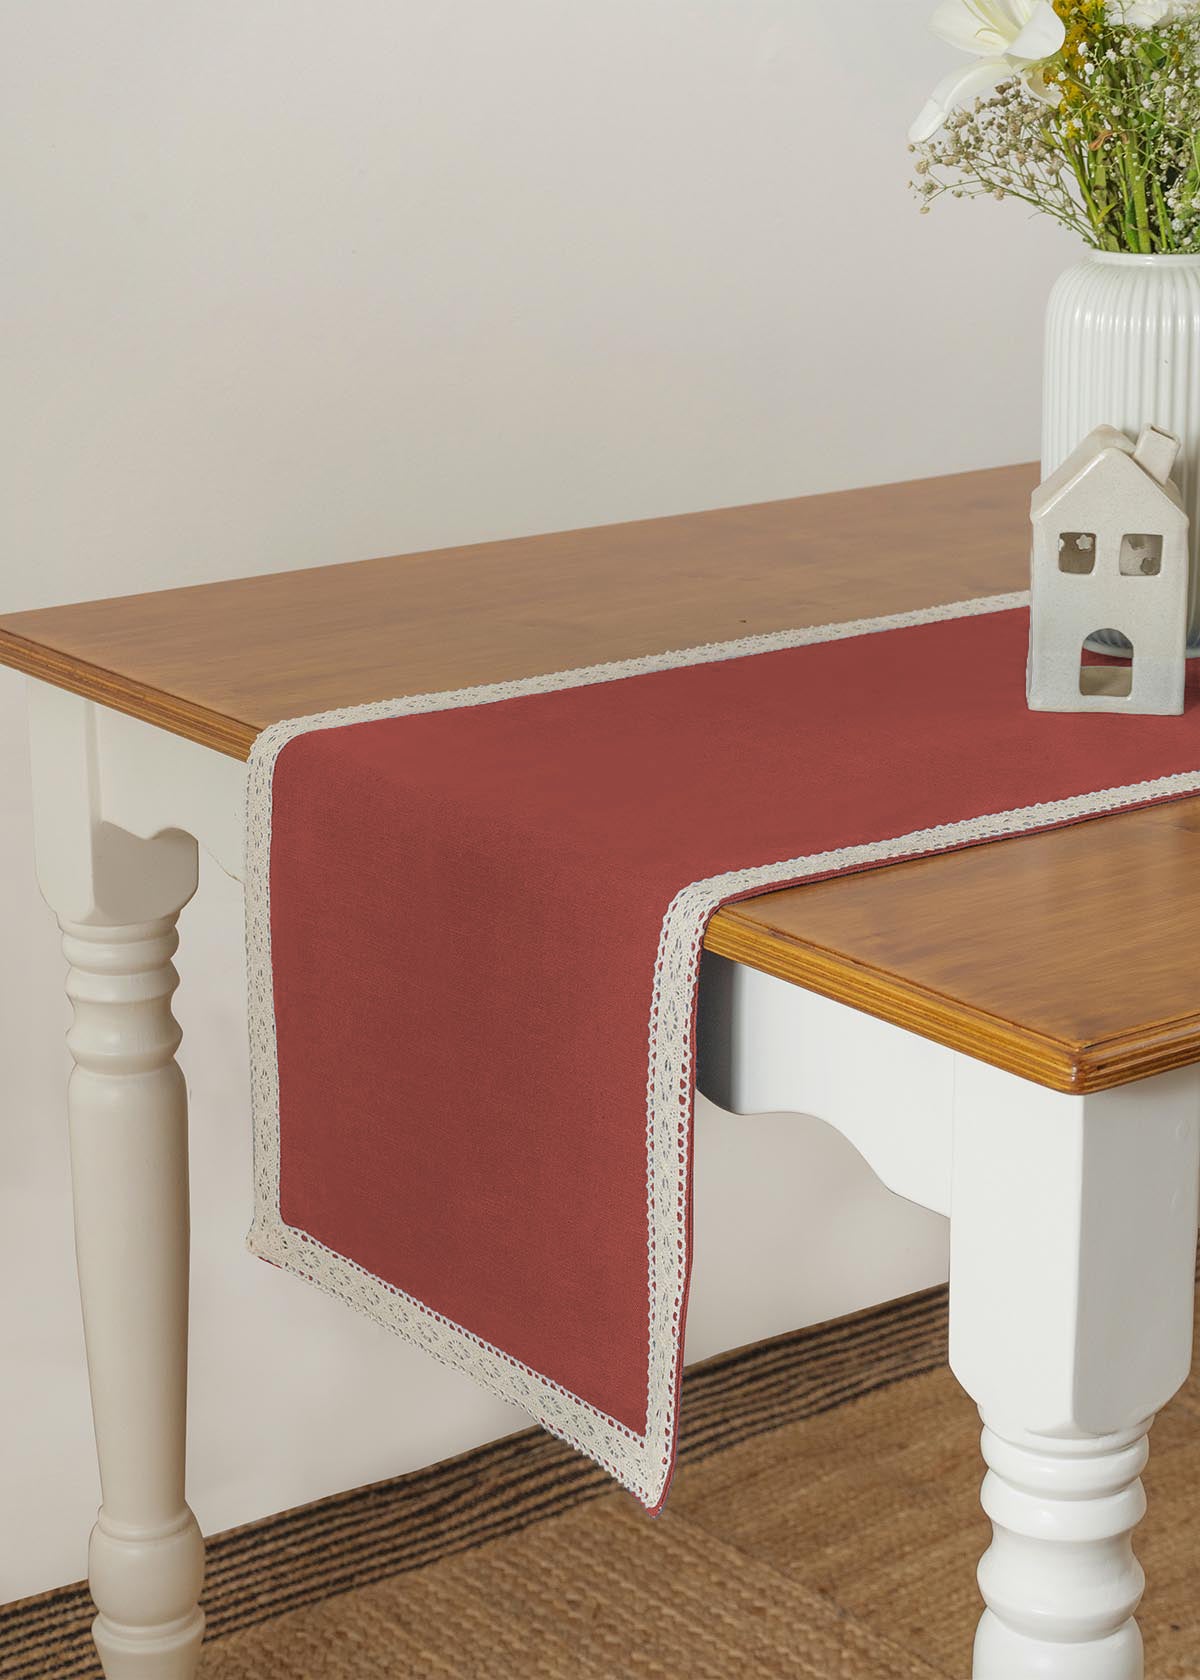 Solid Brick Red 100% cotton plain table runner for 4 seater or 6 seater dining with lace boarder - Brick red